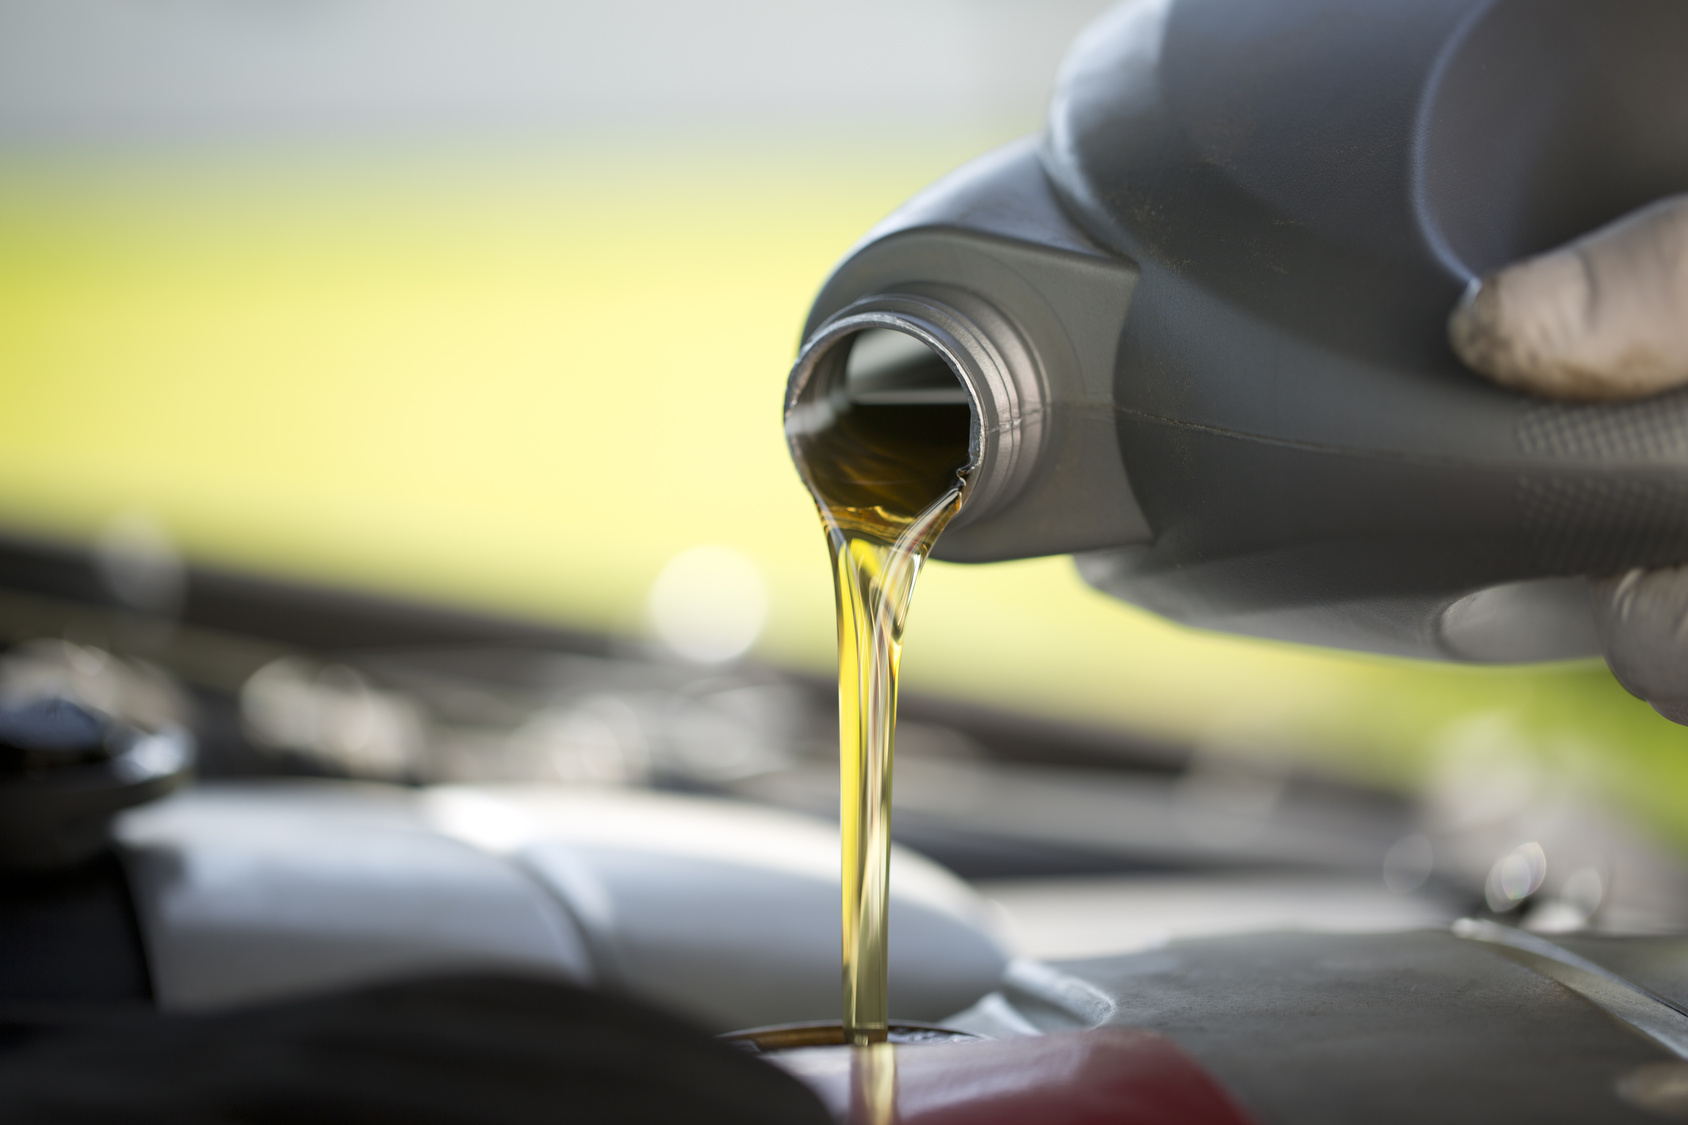 Engine Oil for winter use